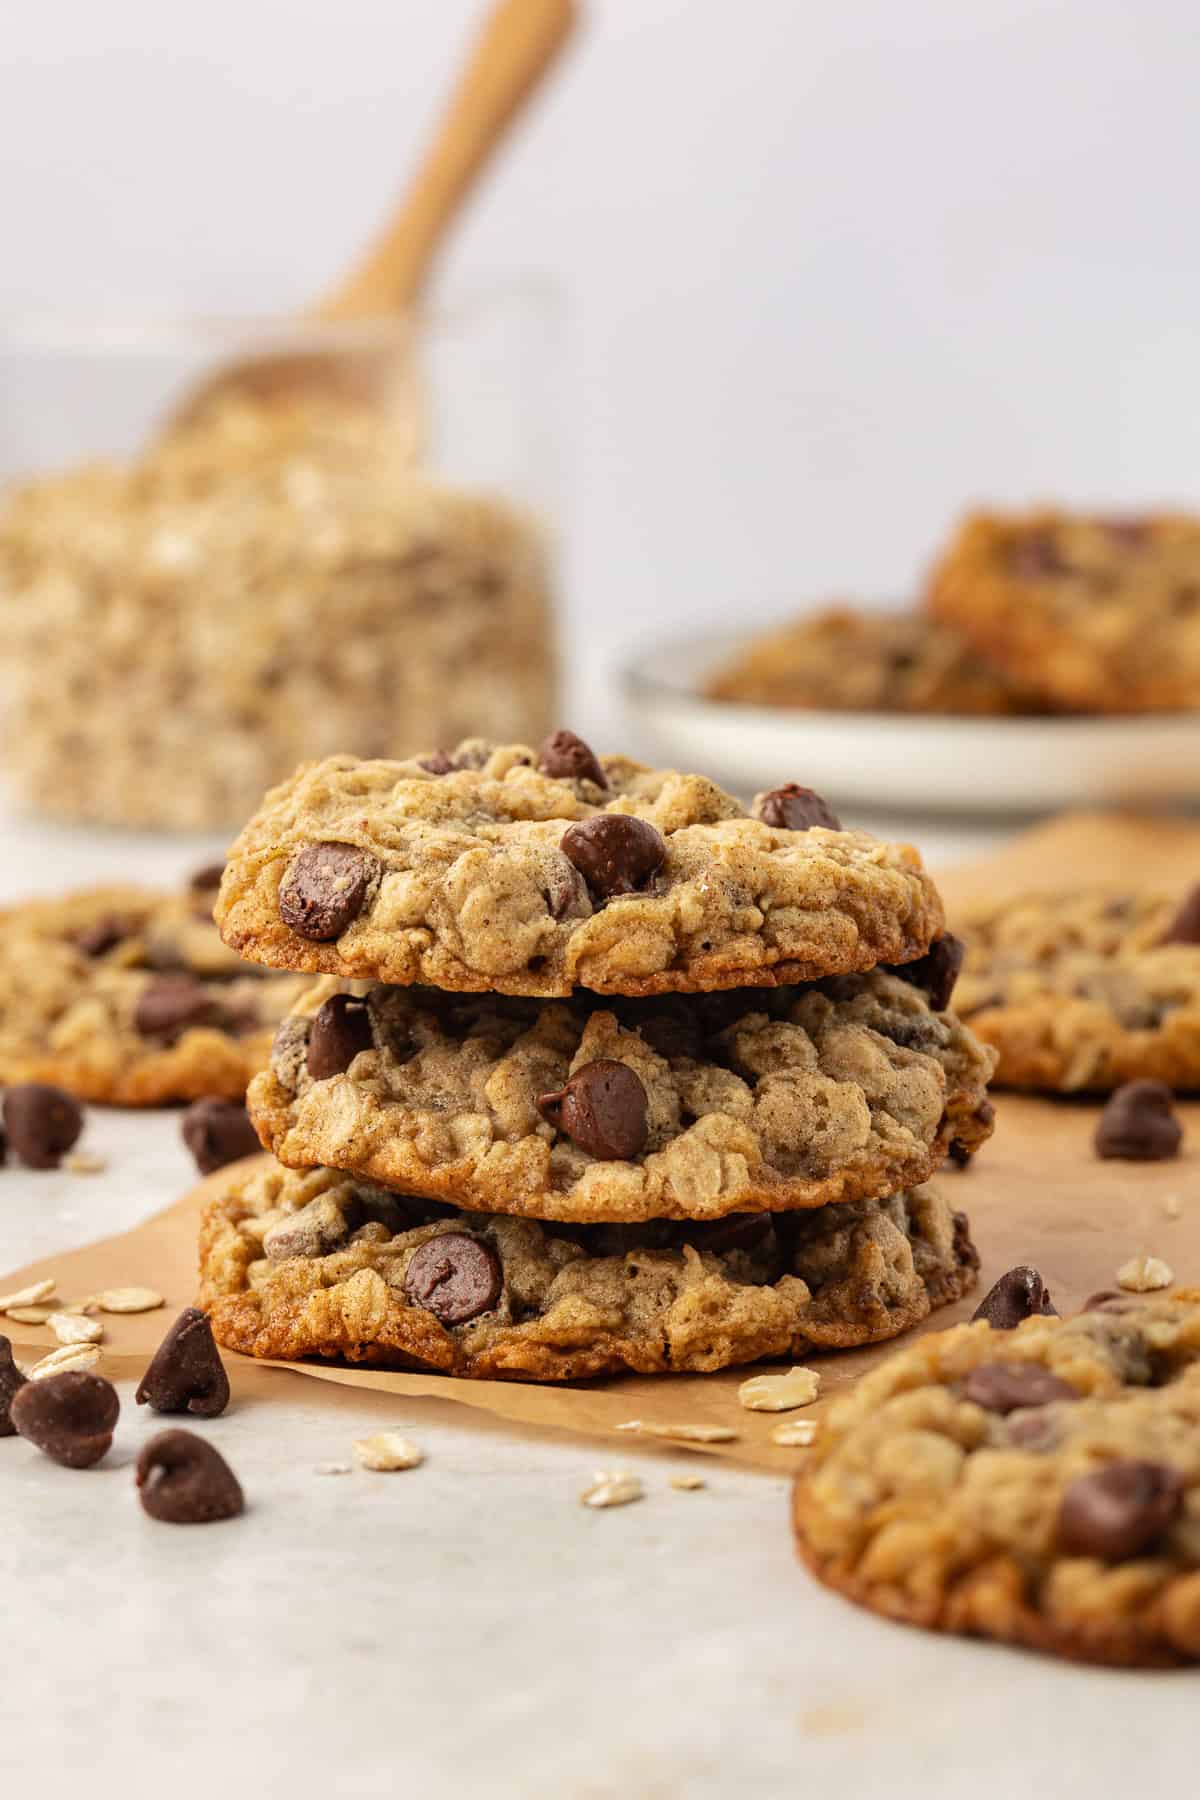 a stack of three oatmeal chocolate chip cookies on brown parchment paper surrounded by more cookies, oats and chocolate chips scattered around